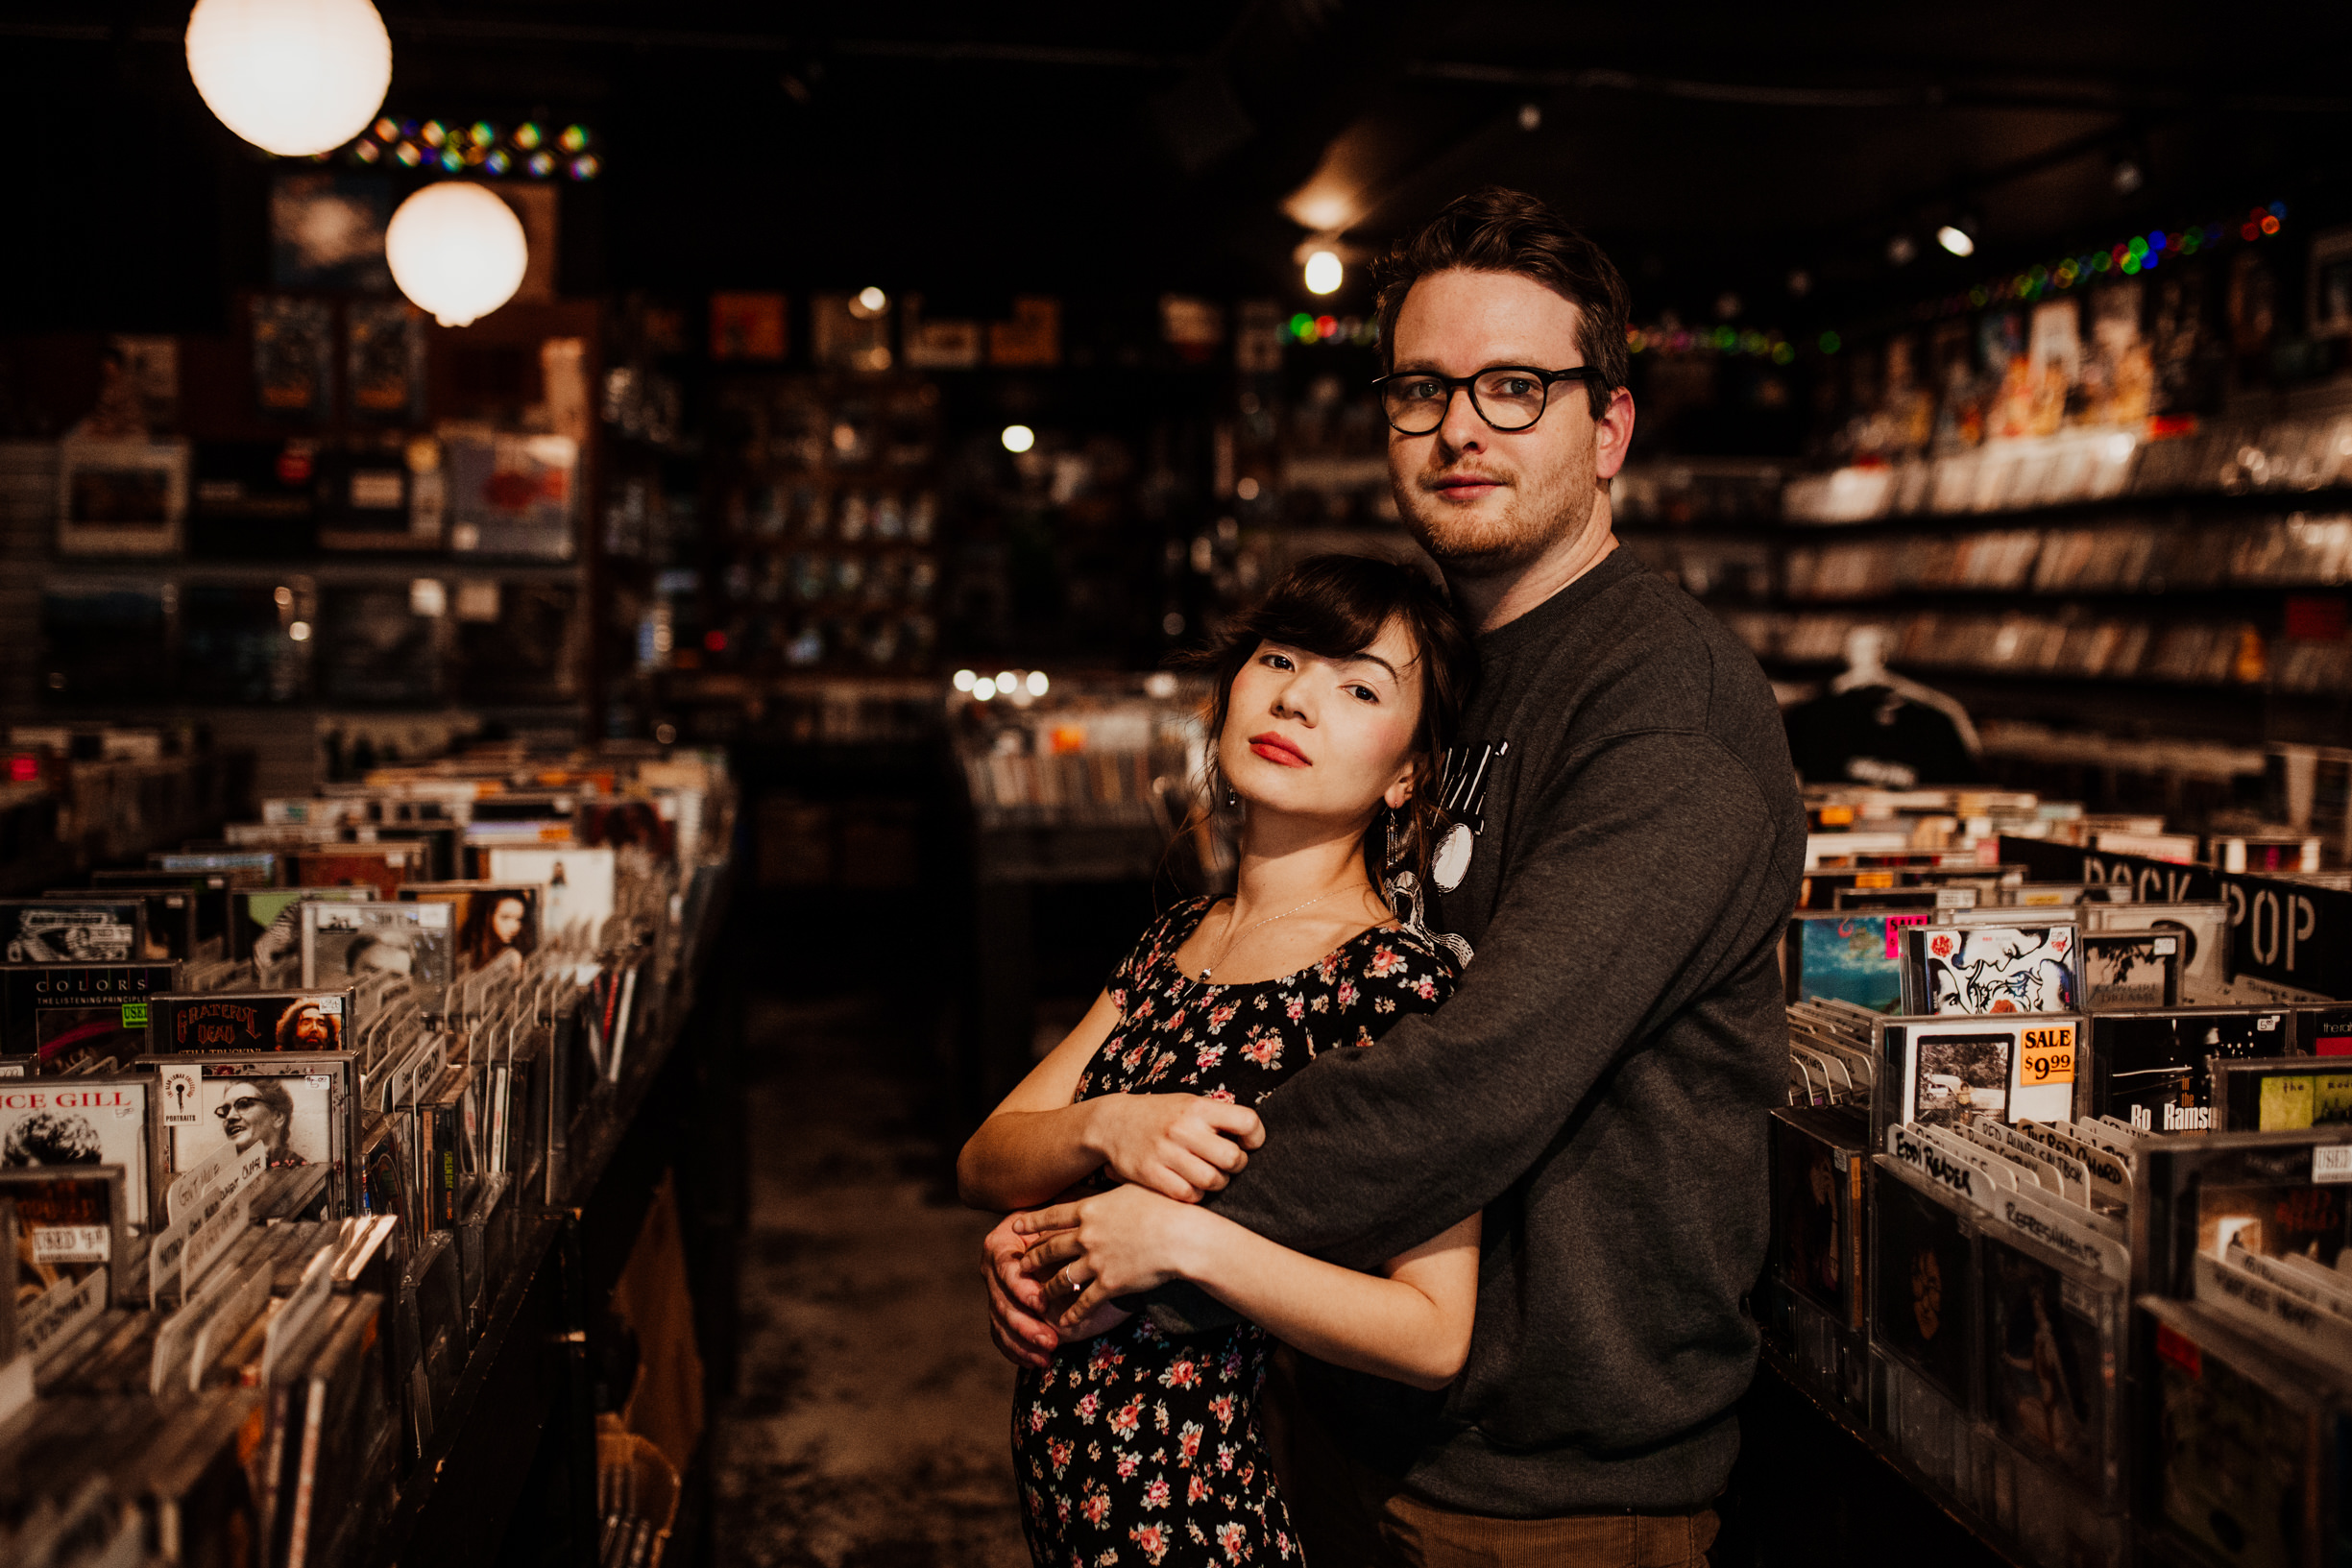 louisville-engagement-photographer-record-store-in-home-session-crystal-ludwick-photo (52 of 53).jpg